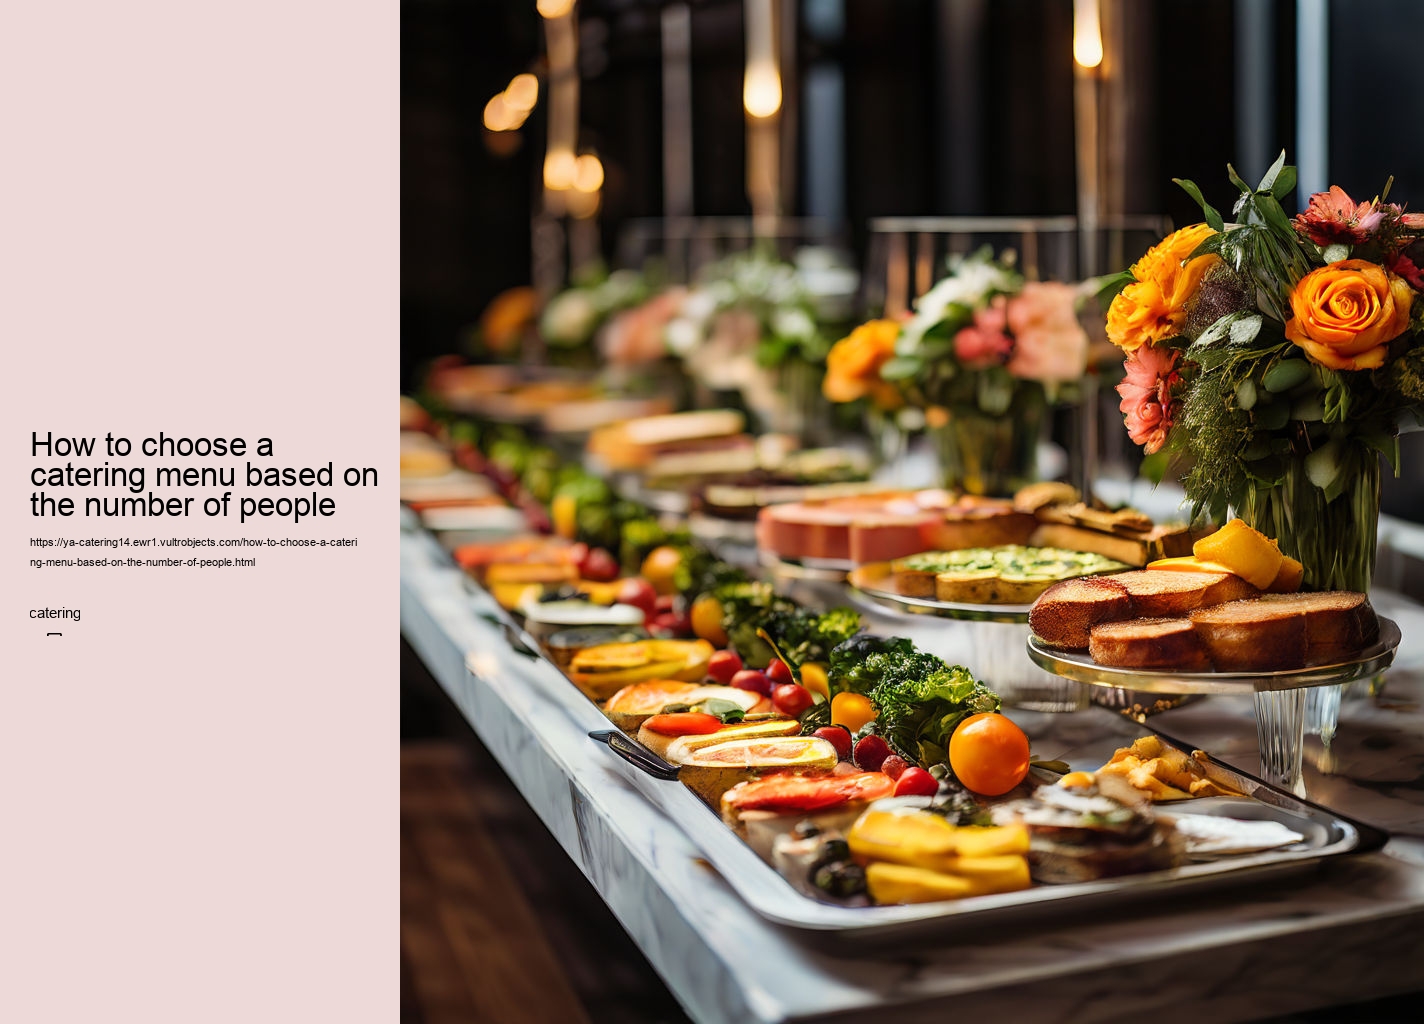 How to choose a catering menu based on the number of people